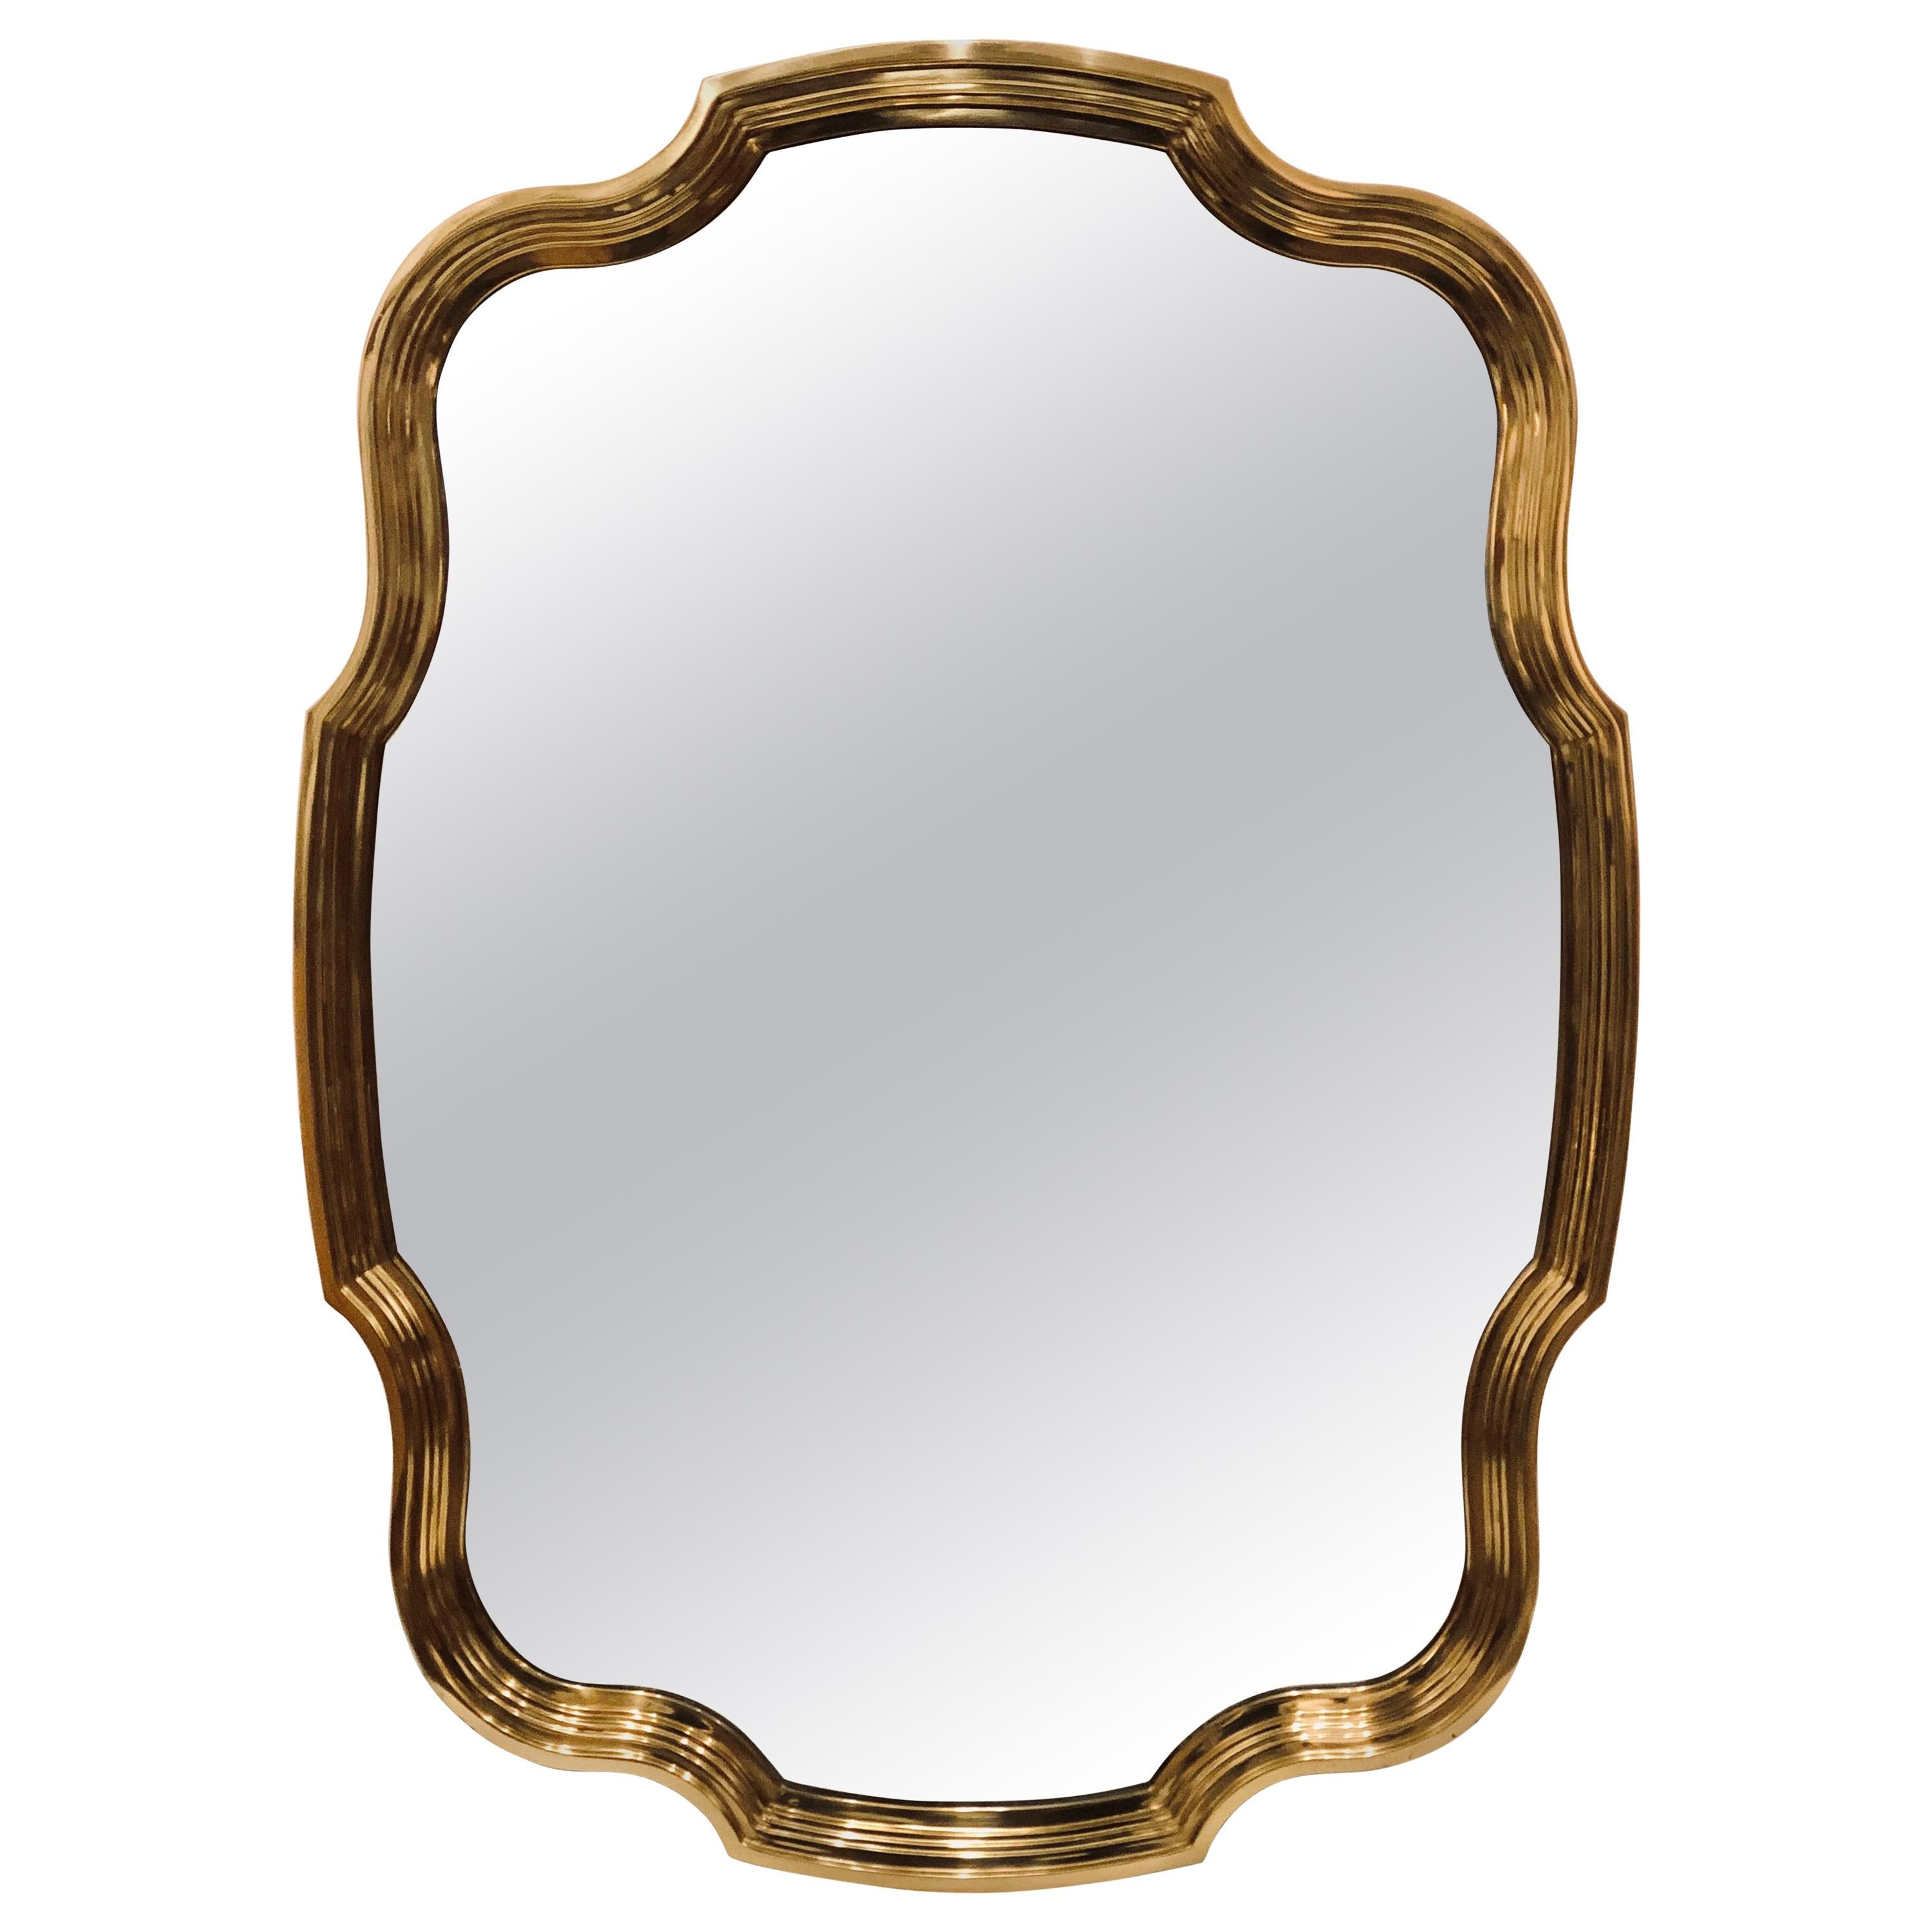 Majestic Unique Solid Scalloped Brass Wall Mirror by Baker